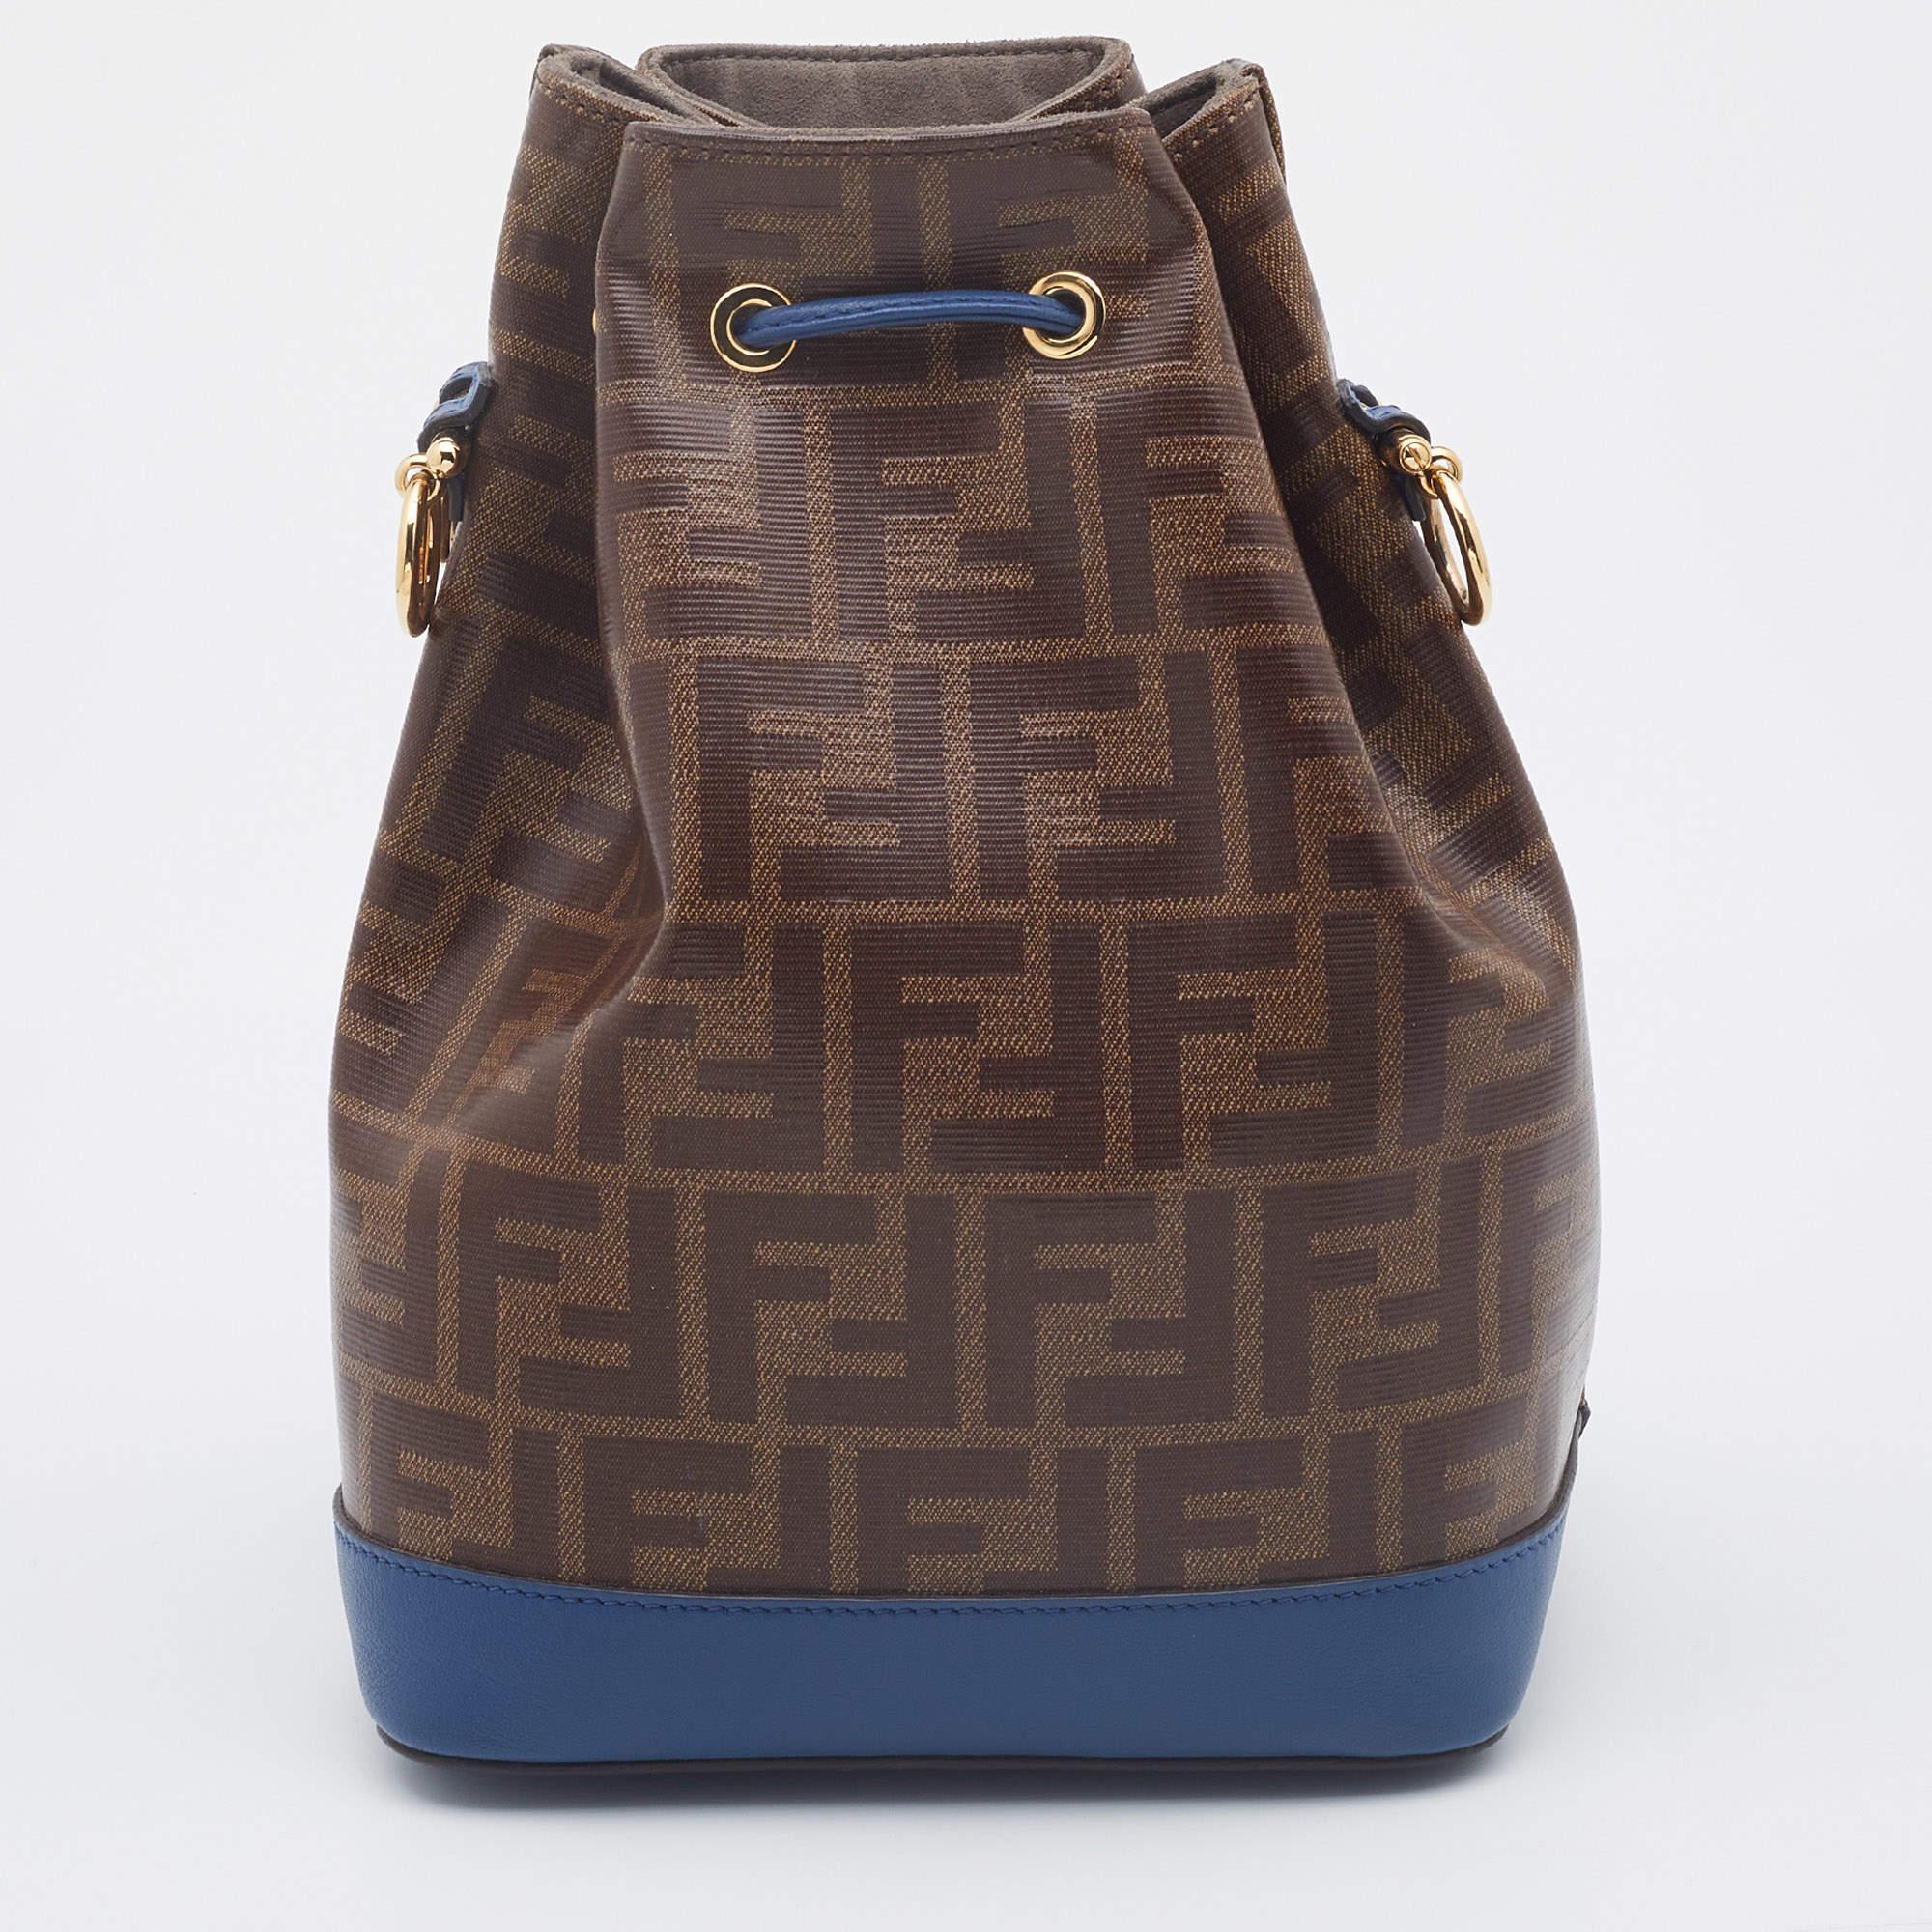 This wonderful Fendi Mon Tresor Grande design is made from Zucca-coated canvas, leather, and gold-tone hardware. The bag has a bucket shape with a drawstring closure that secures the interior. It is complete with a shoulder strap. It is an apt